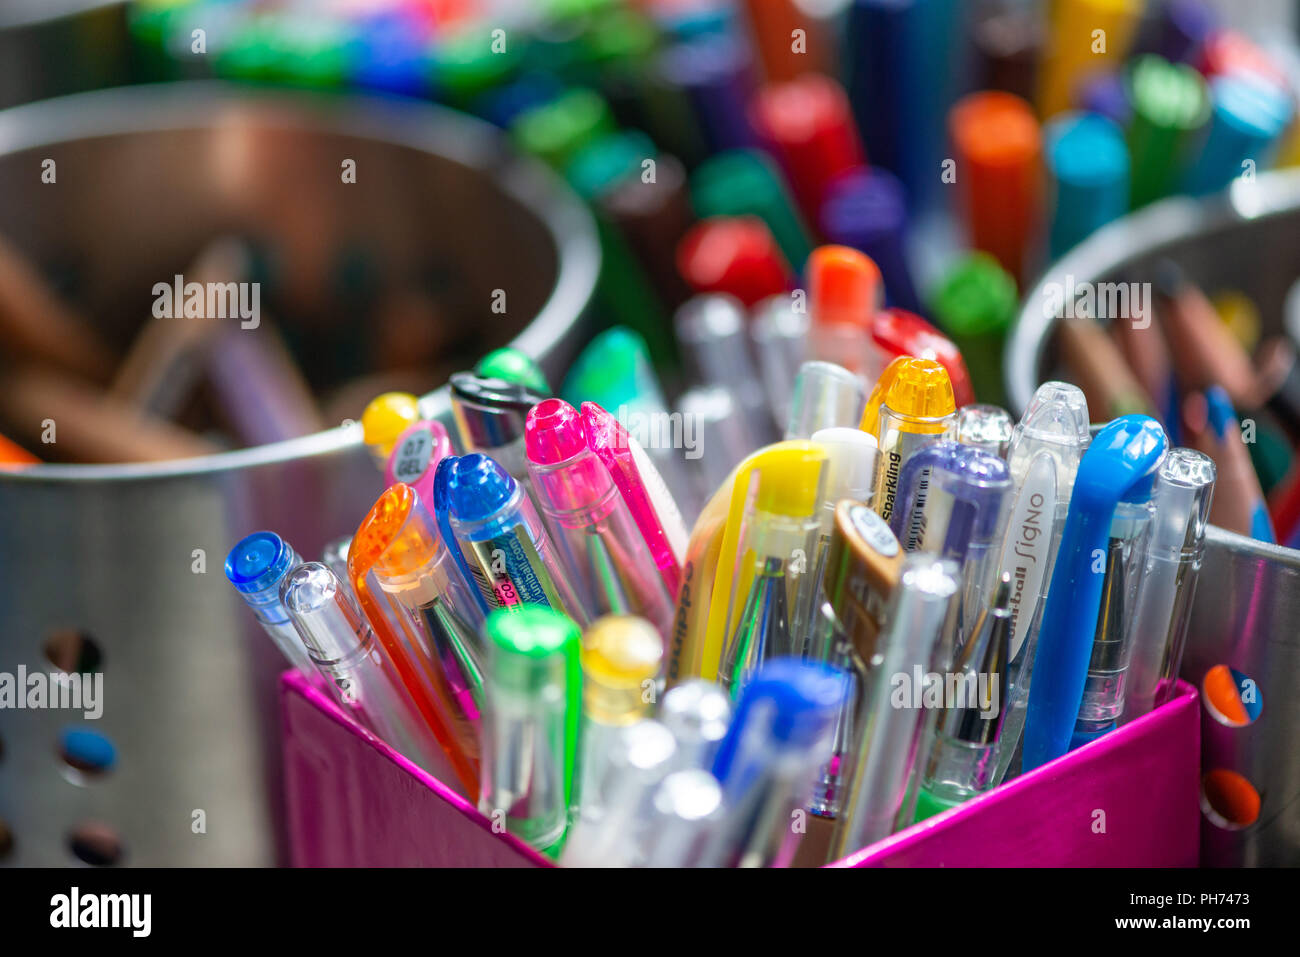 Close up image of pots of coloured pens and crayons in a school art classroom Stock Photo